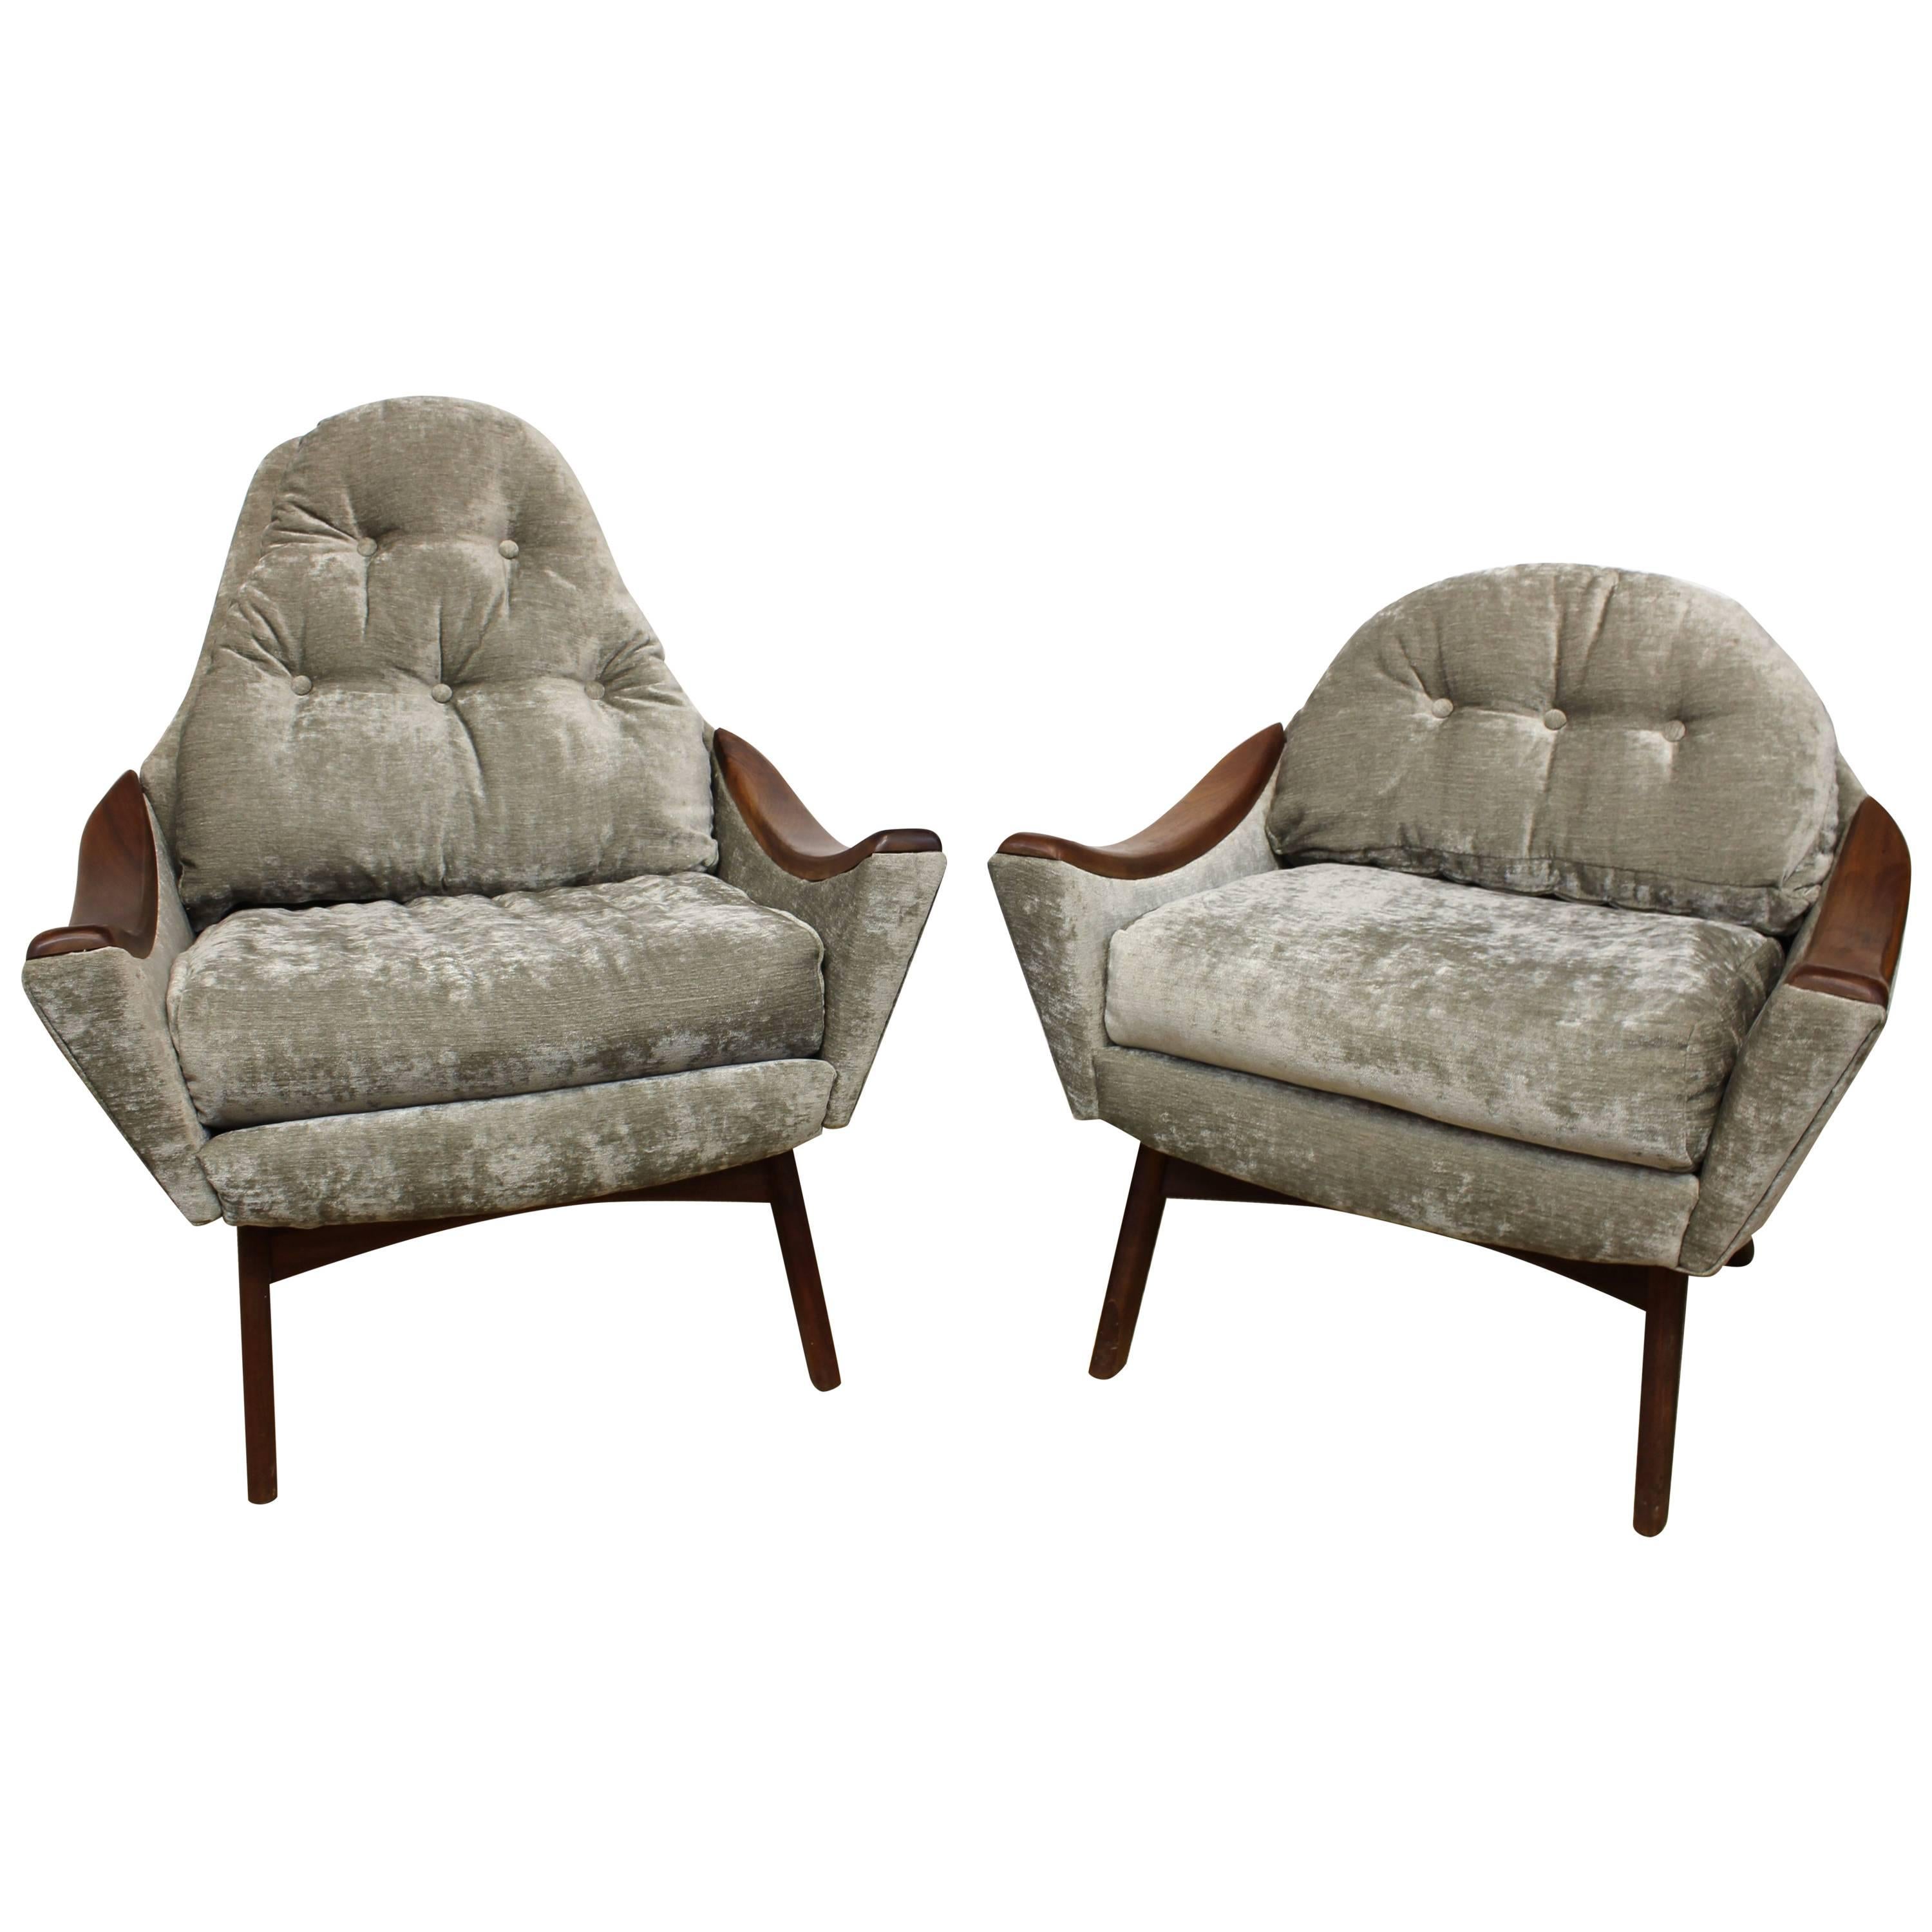 Adrian Pearsall 'Mama' and 'Papa' Lounge Chairs in Velvet